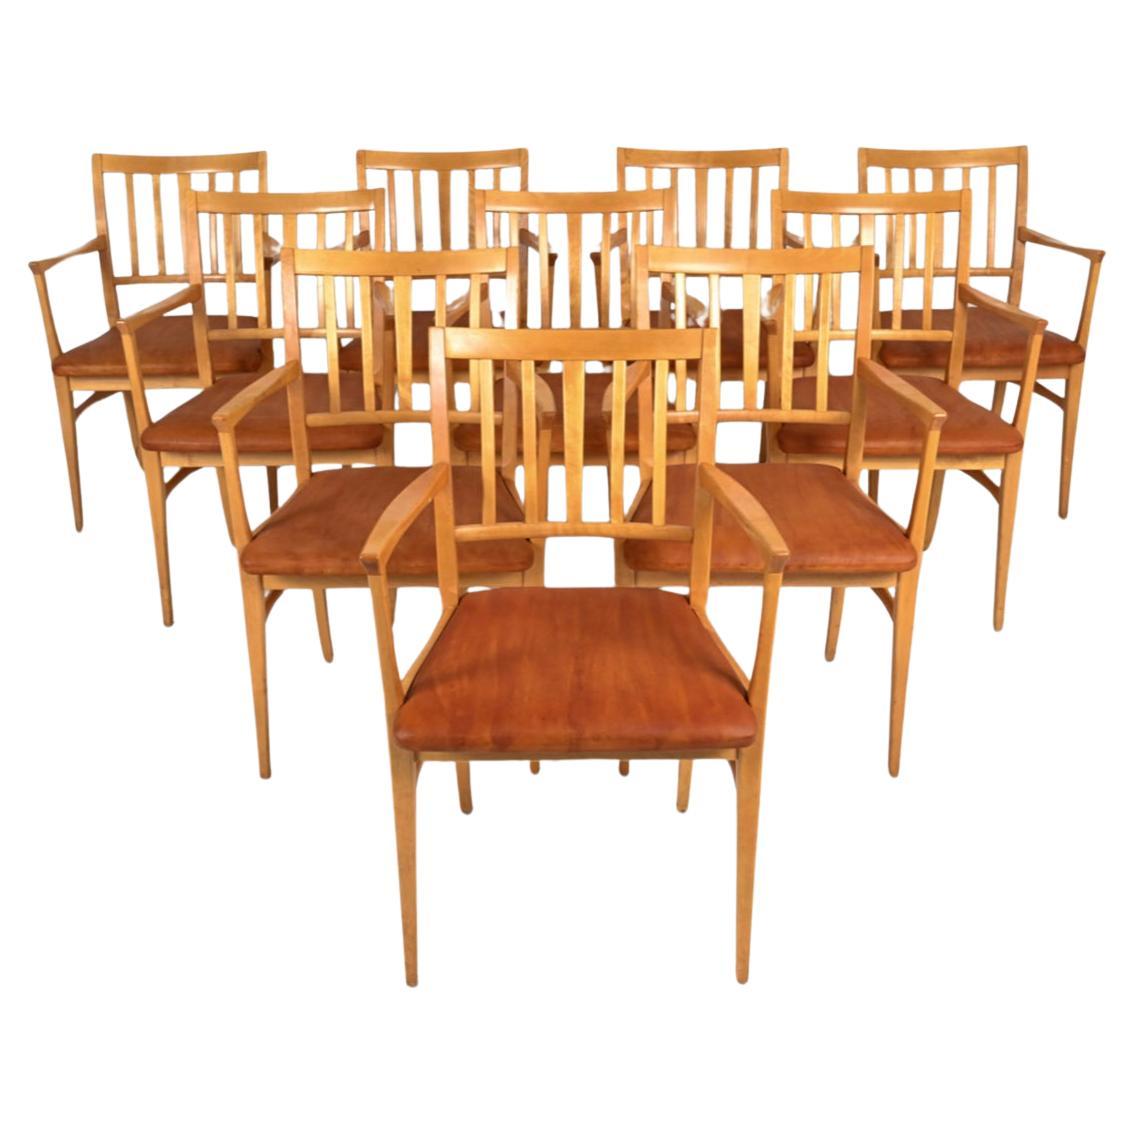 10 Swedish Mid Century Modern slat back dining chairs designed by Carl Malmsten For Sale